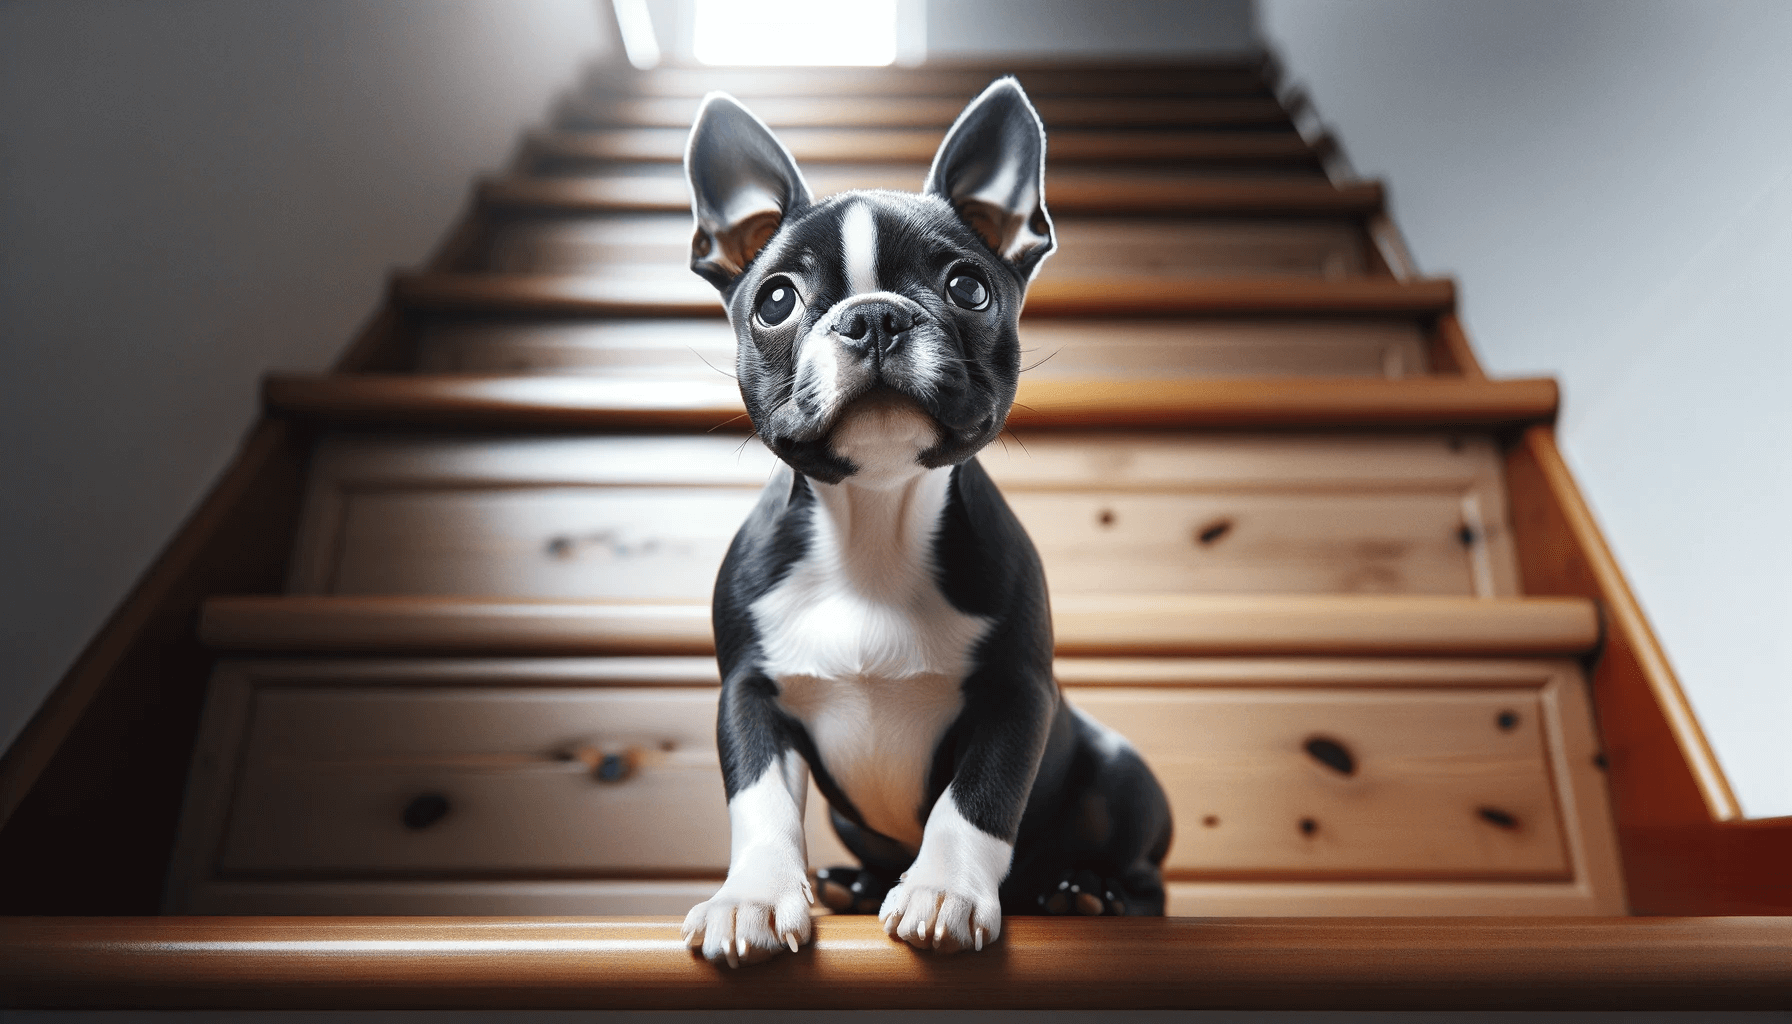 A Blue Boston Terrier looking up from a set of stairs, displaying its compact build and the breed's characteristic tuxedo markings.